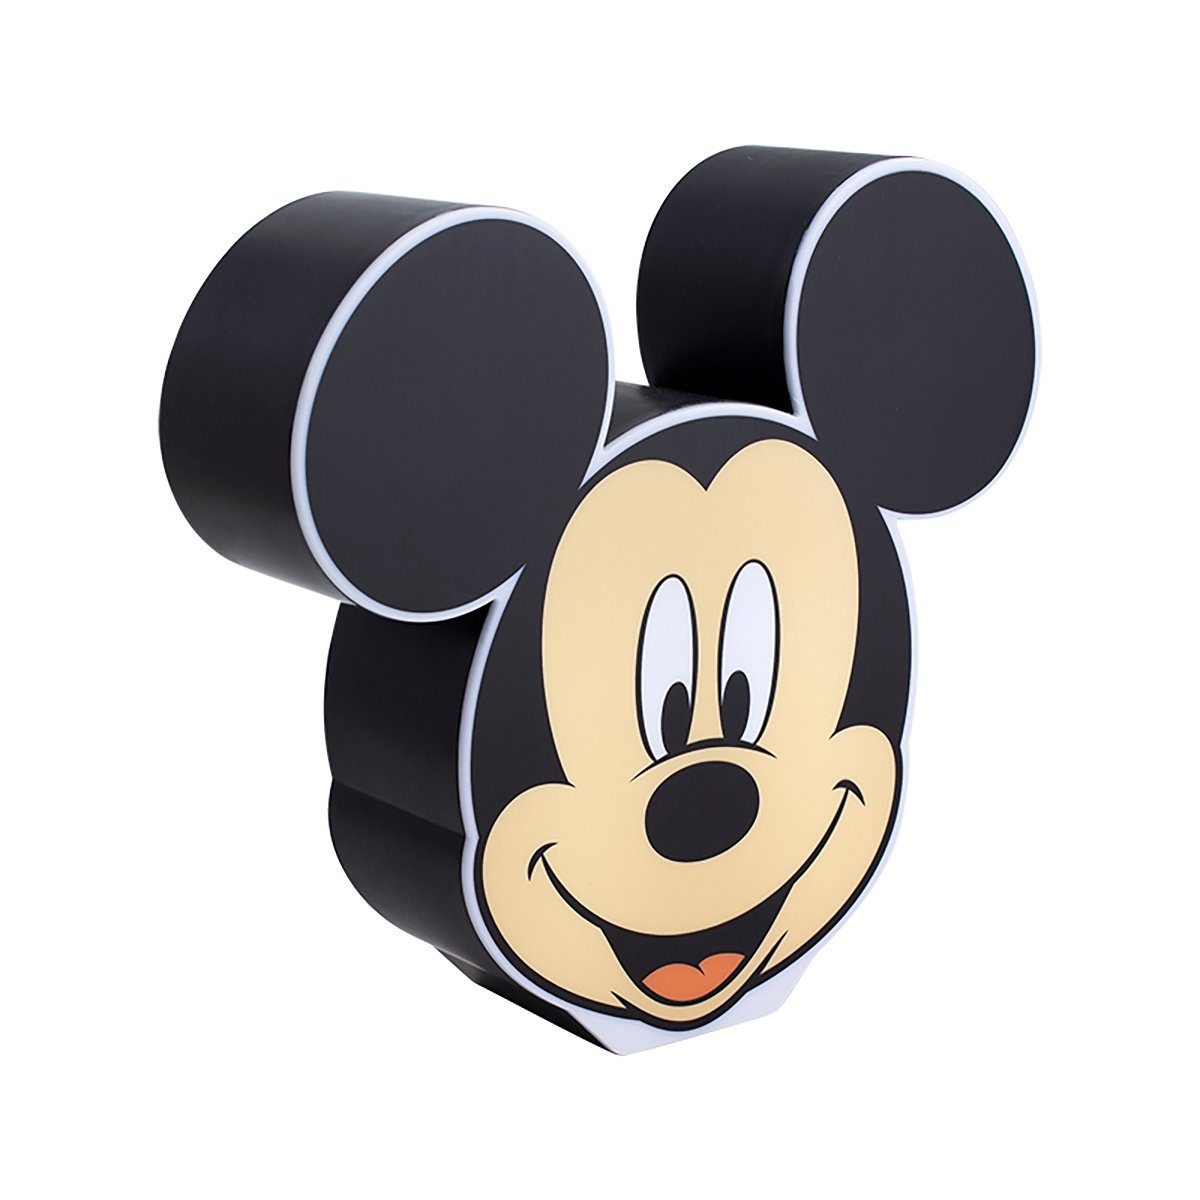 Paladone Stehlampe Disney Mouse Mickey Leuchte